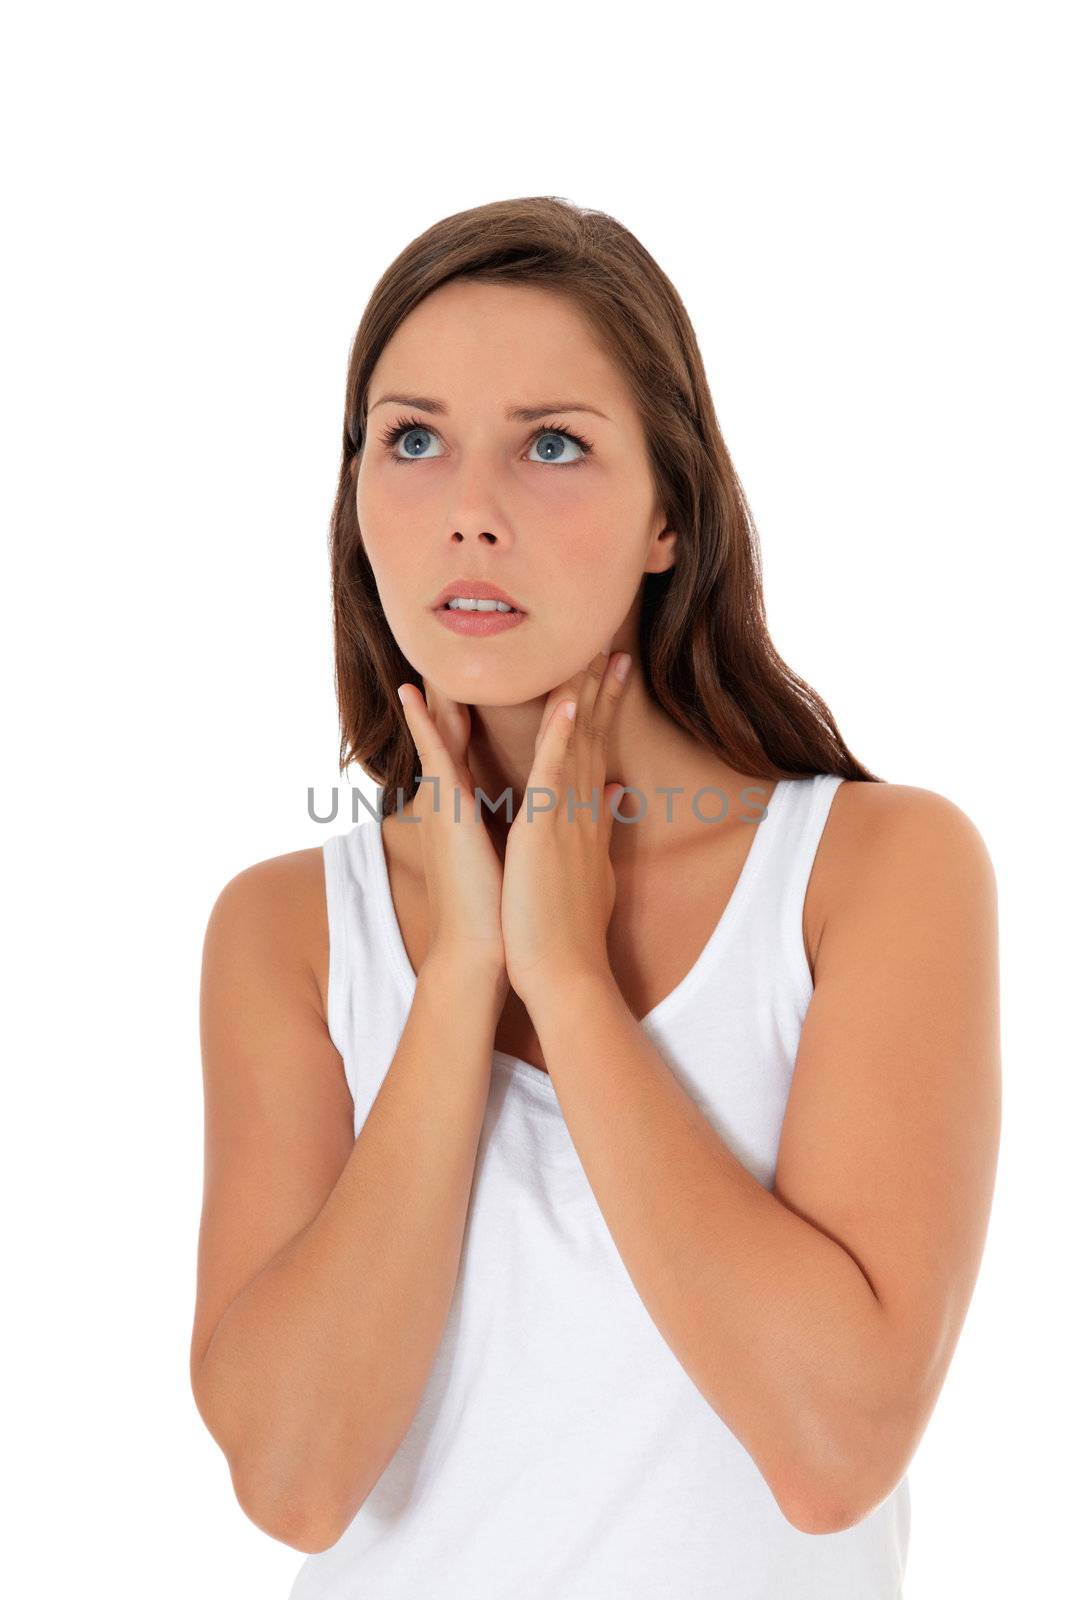 Attractive woman fells unwell. All isolated on white background.